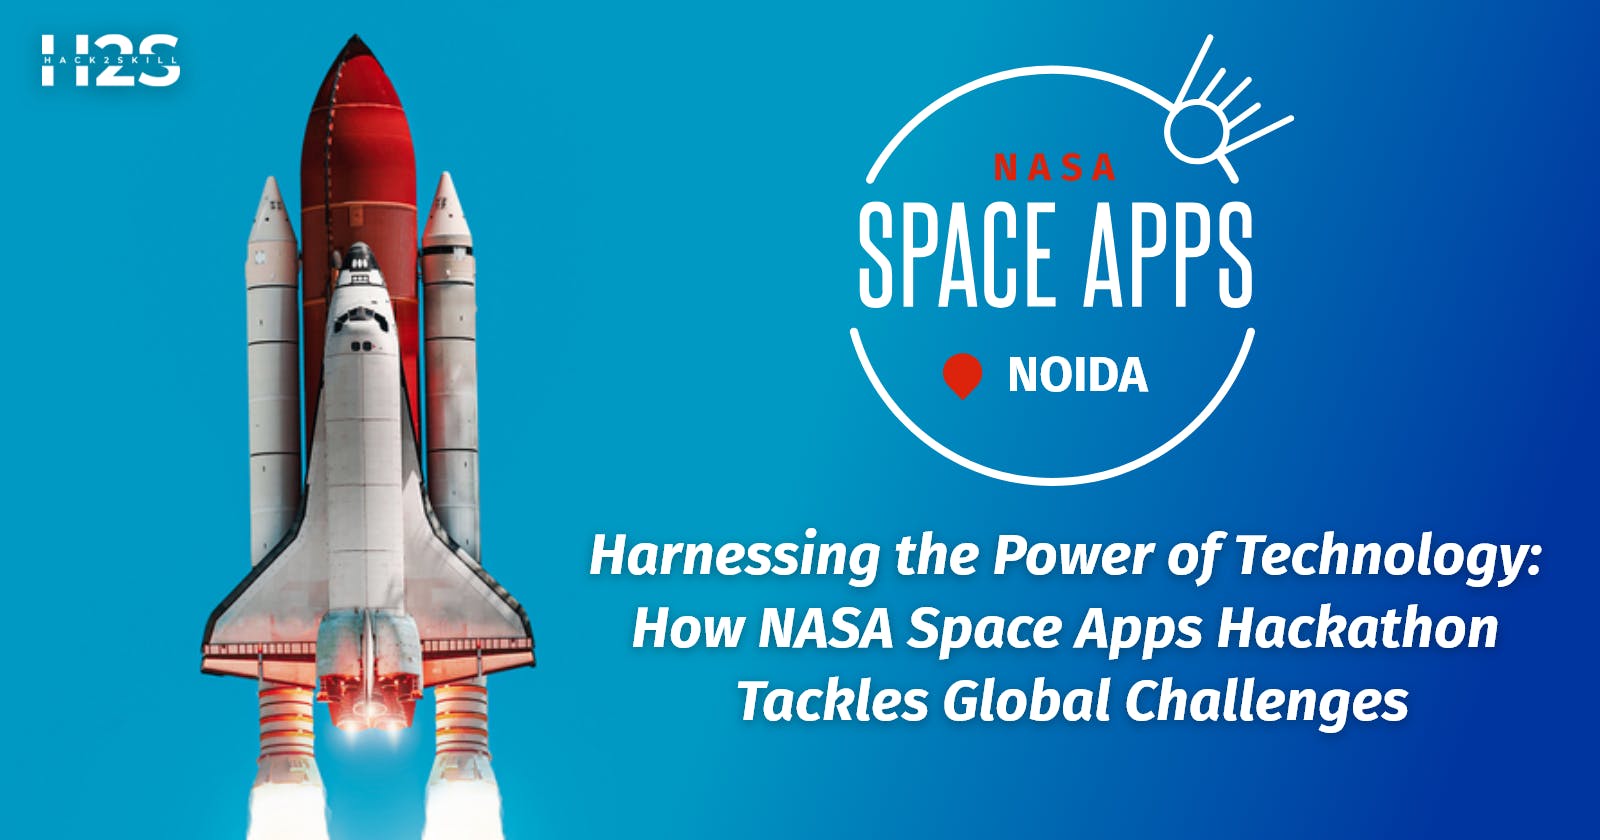 Harnessing the Power of Technology: How NASA Space Apps Hackathon Tackles Global Challenges